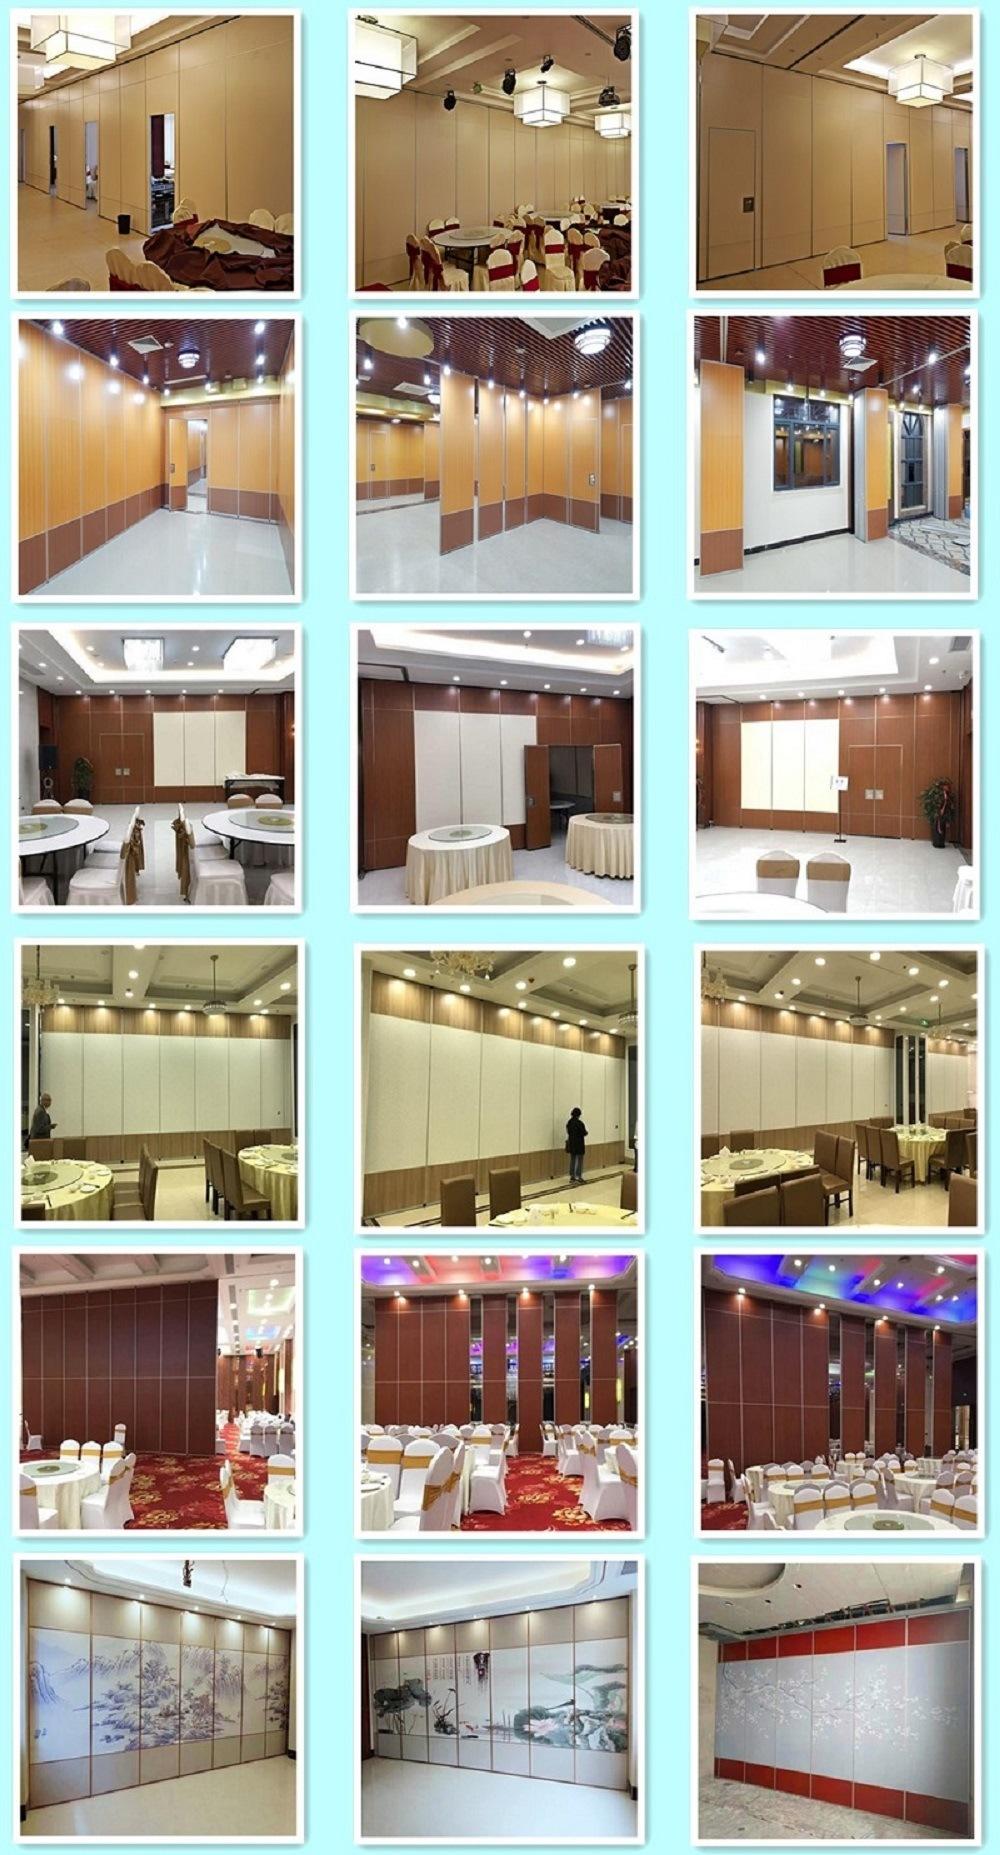 Type 85 Banquet Hall Acoustic Partition Folding Movable Walls